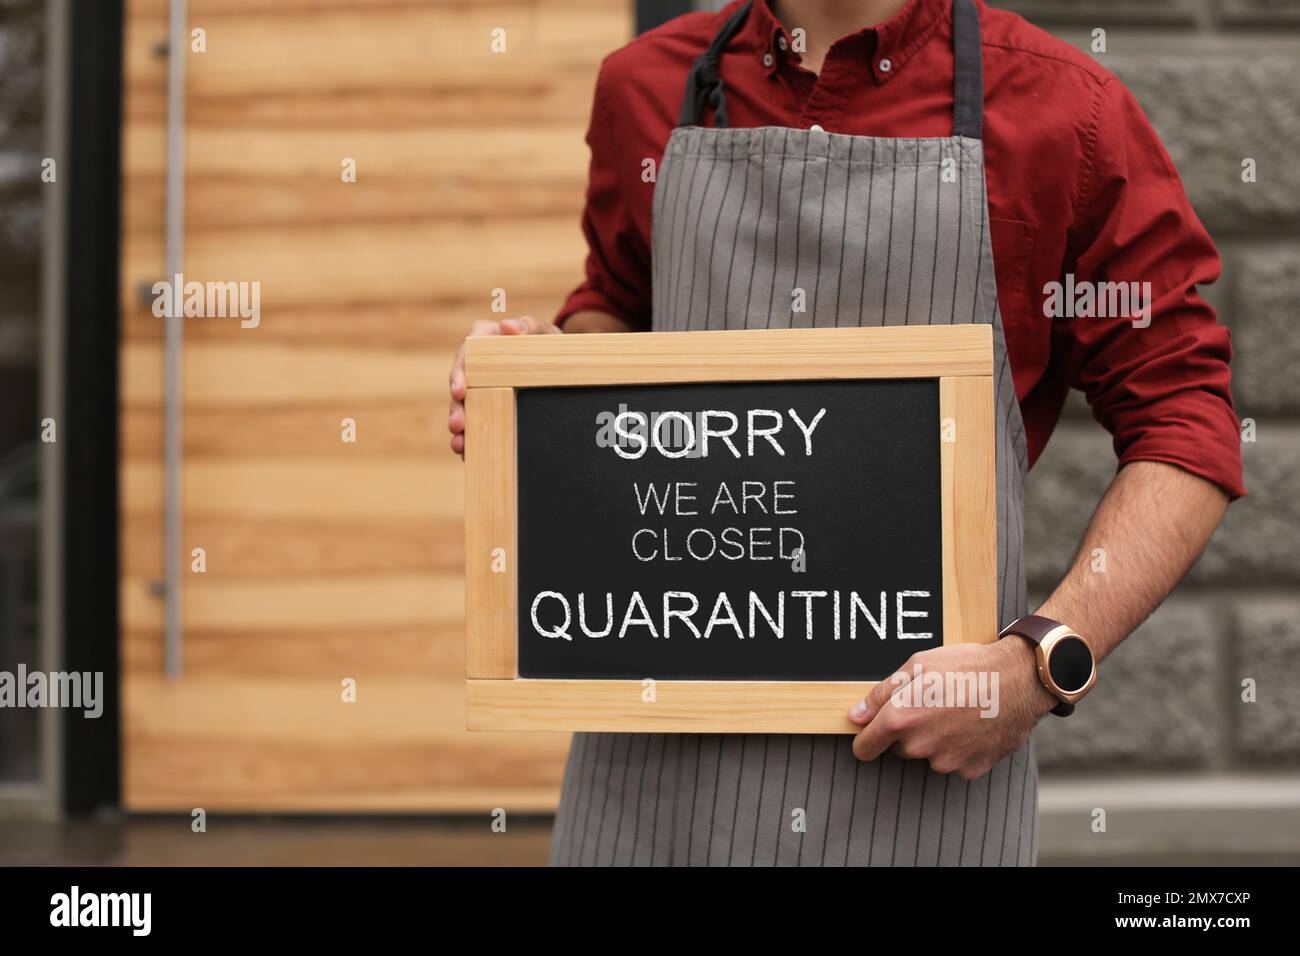 Business owner holding sign with text SORRY WE ARE CLOSED QUARANTINE near his cafe, closeup Stock Photo